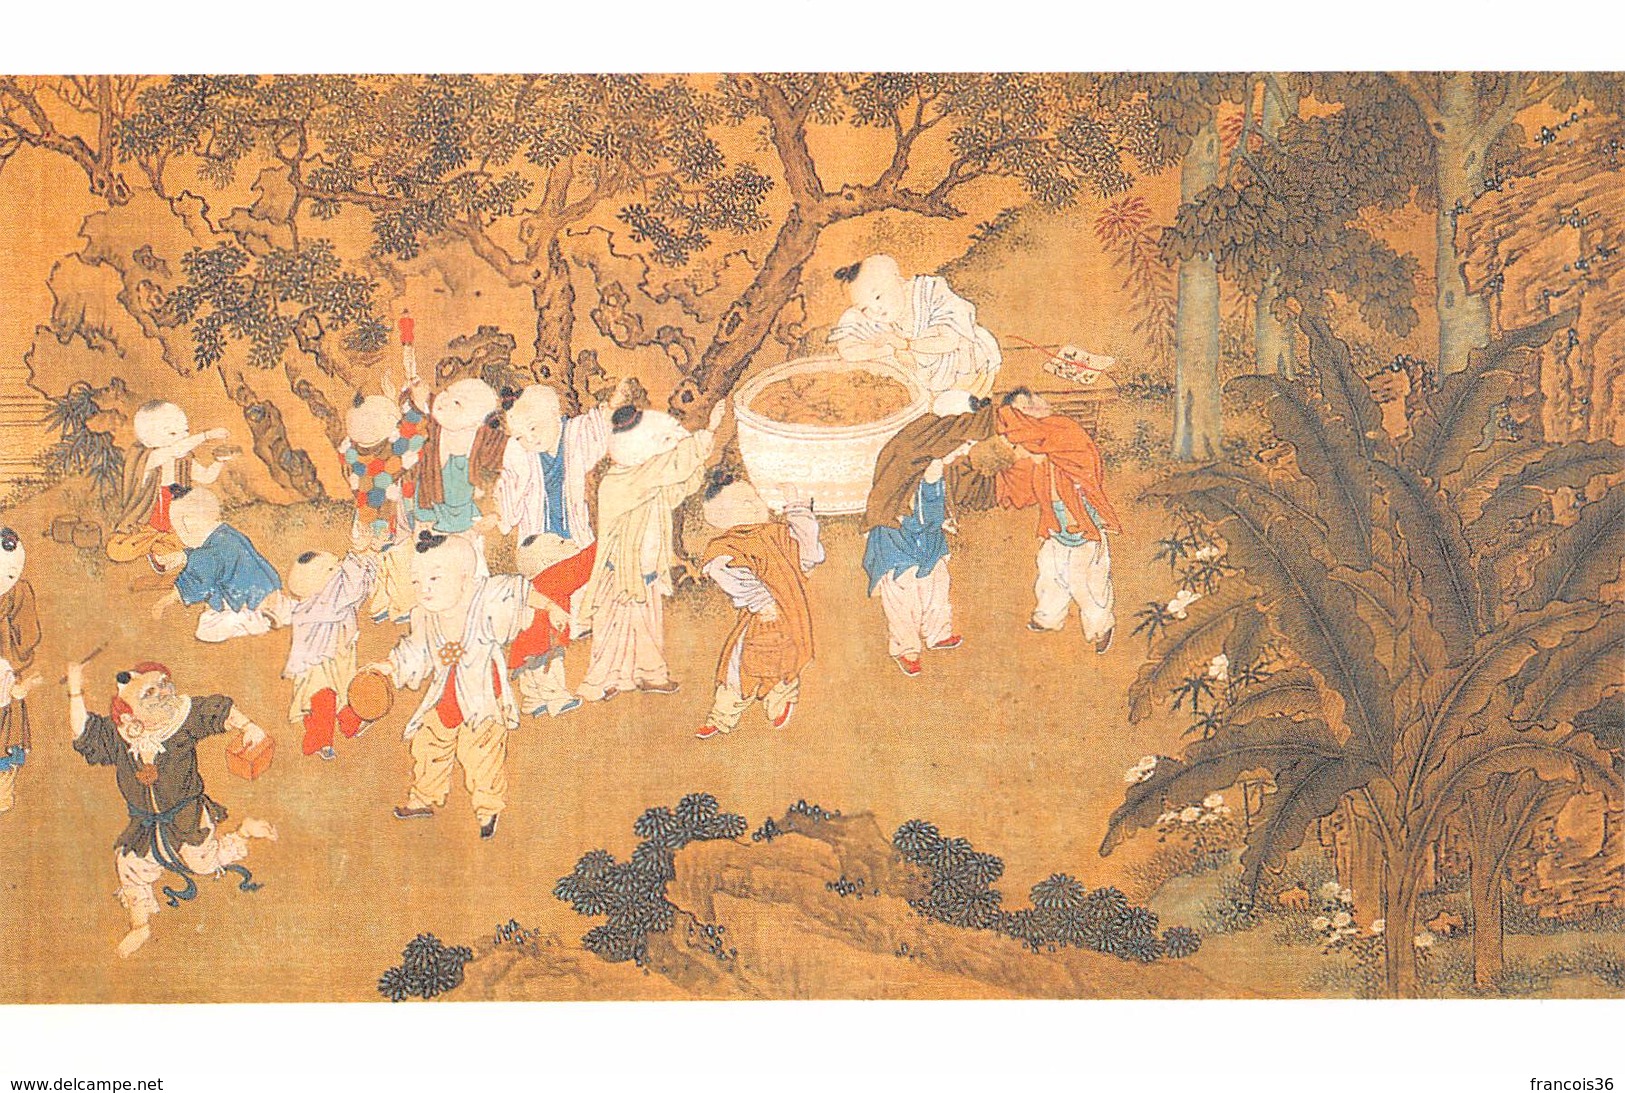 10 cards : TAIWAN - Ancient Chinese painting " One hundred young boys " in original package